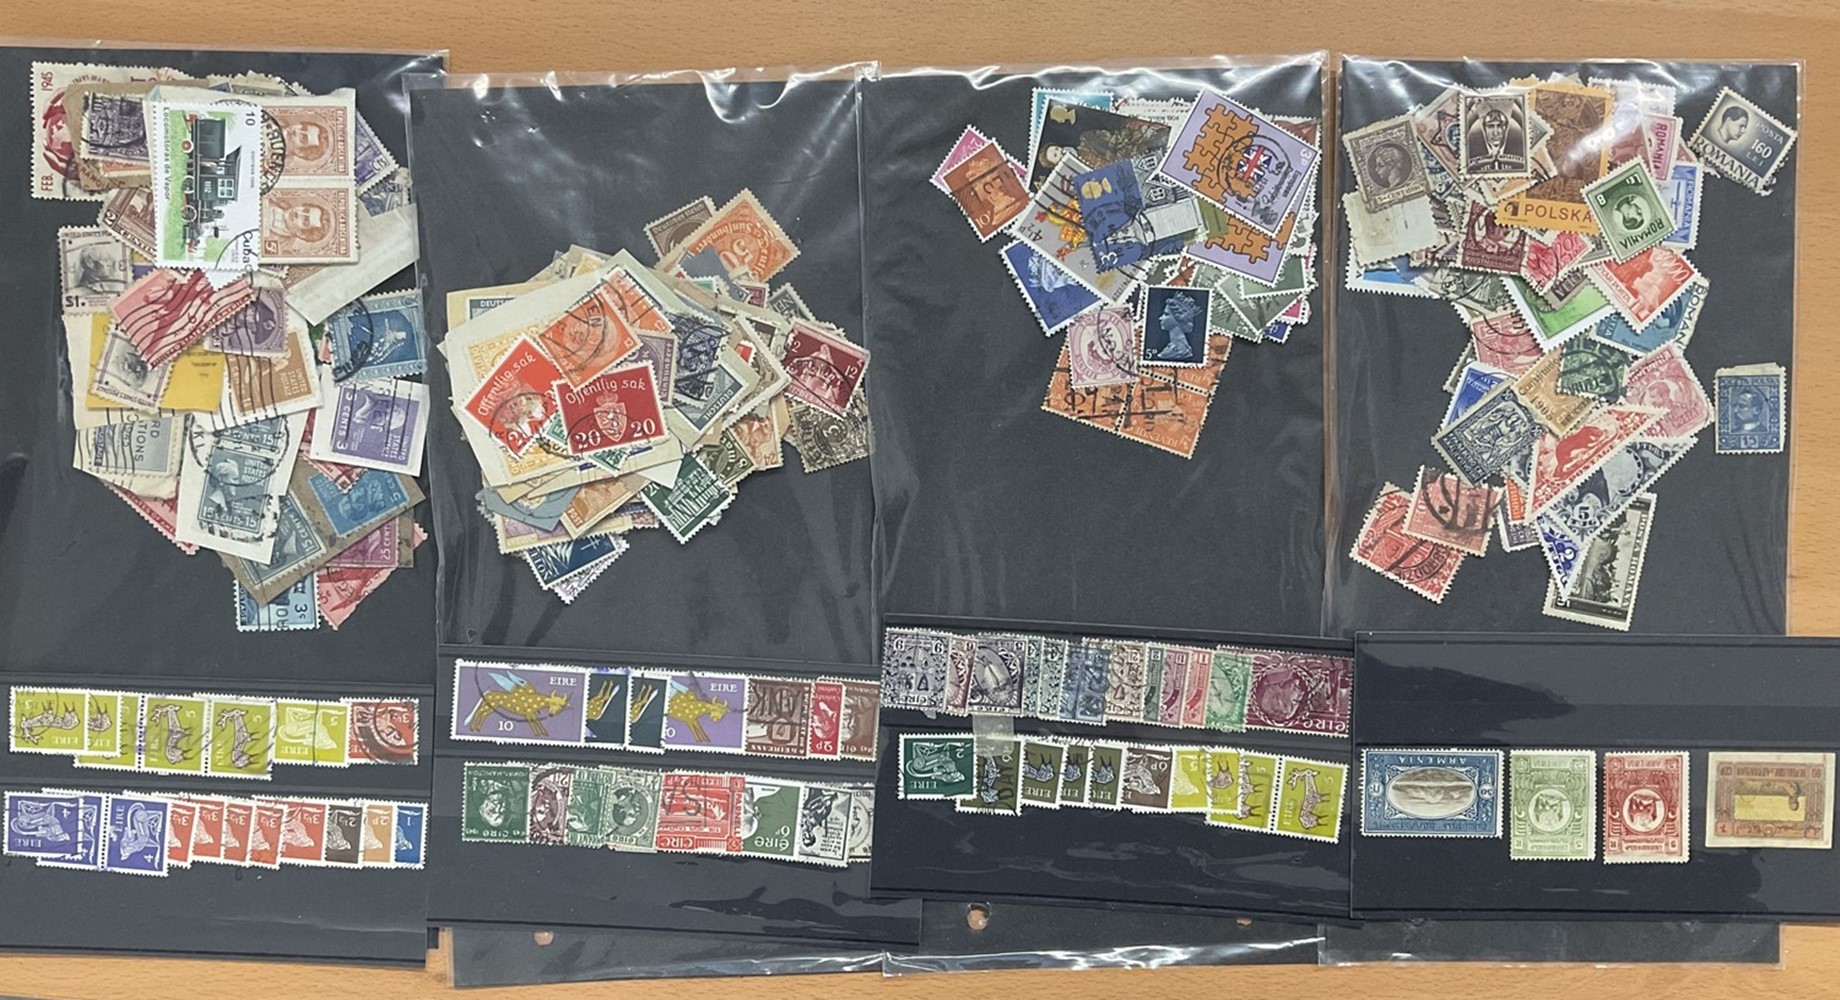 4 Bags of assorted stamps and 5 stockcards. Such as Europe, France, Germany, Israel, Ireland, GB,